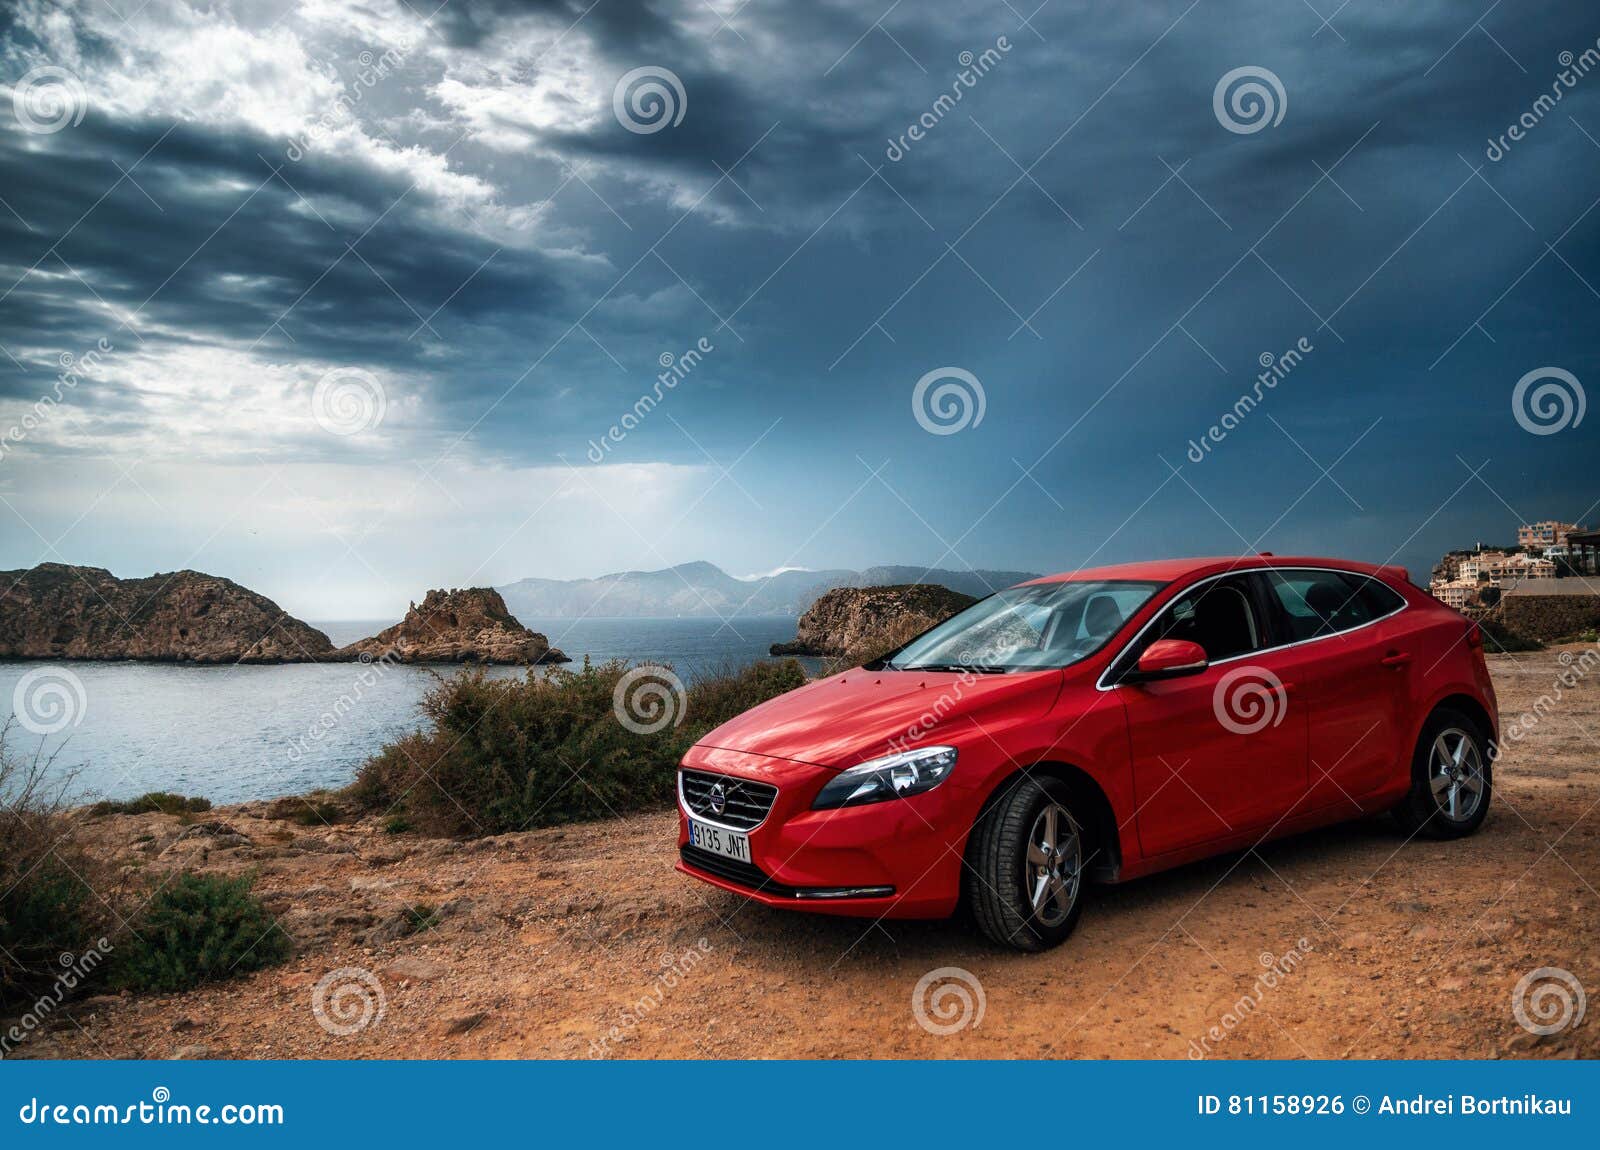 eskortere Våd rent Red Car Volvo V40 Standing on the Edge of a Cliff Against the Stormy Sky.  Editorial Photo - Image of ligth, edge: 81158926